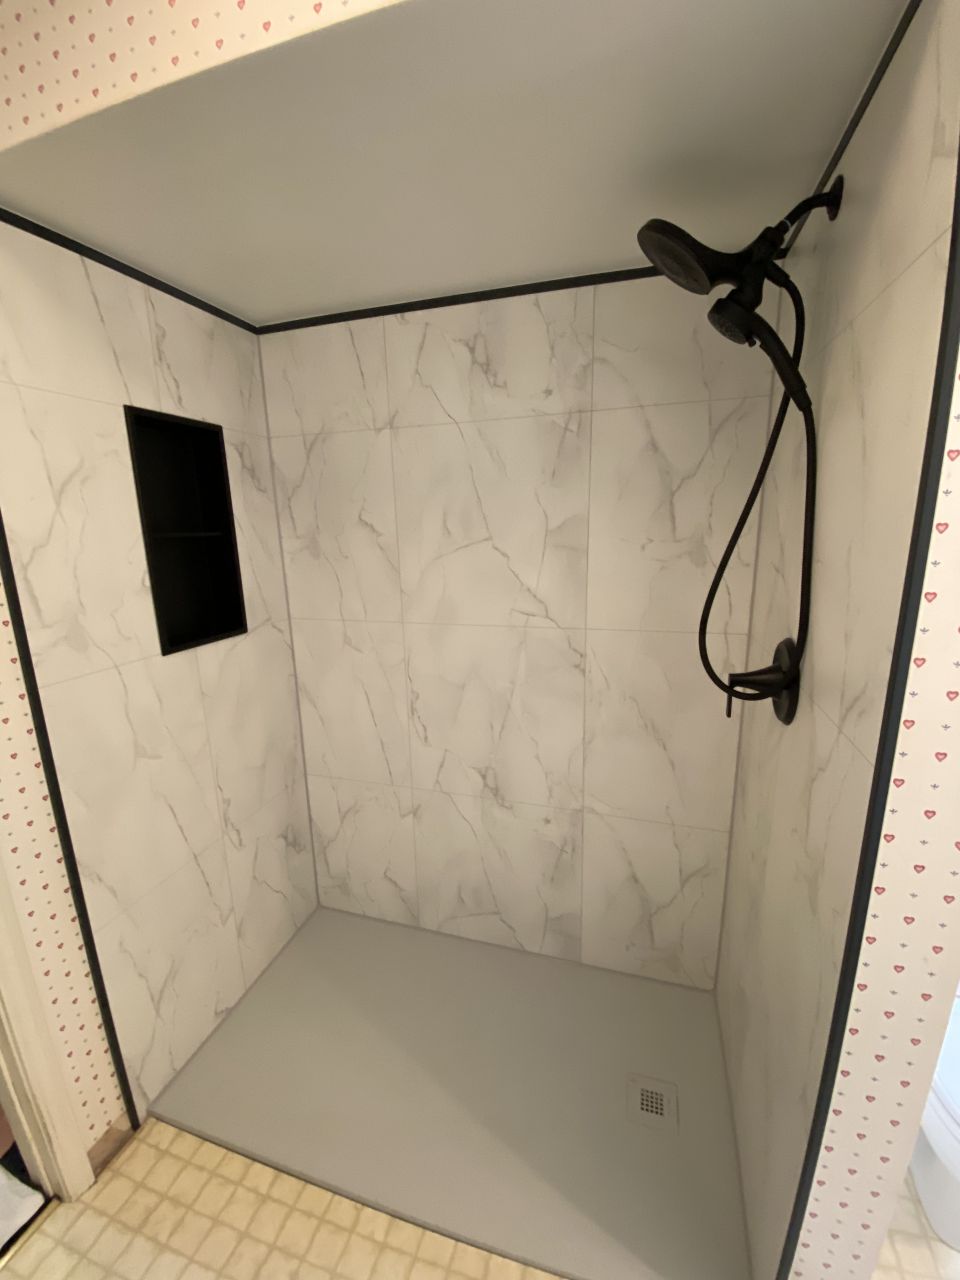 Bathroom Remodeling | Shower Design with a grout free low profile sylish shower base | Cleveland Bathroom remodel